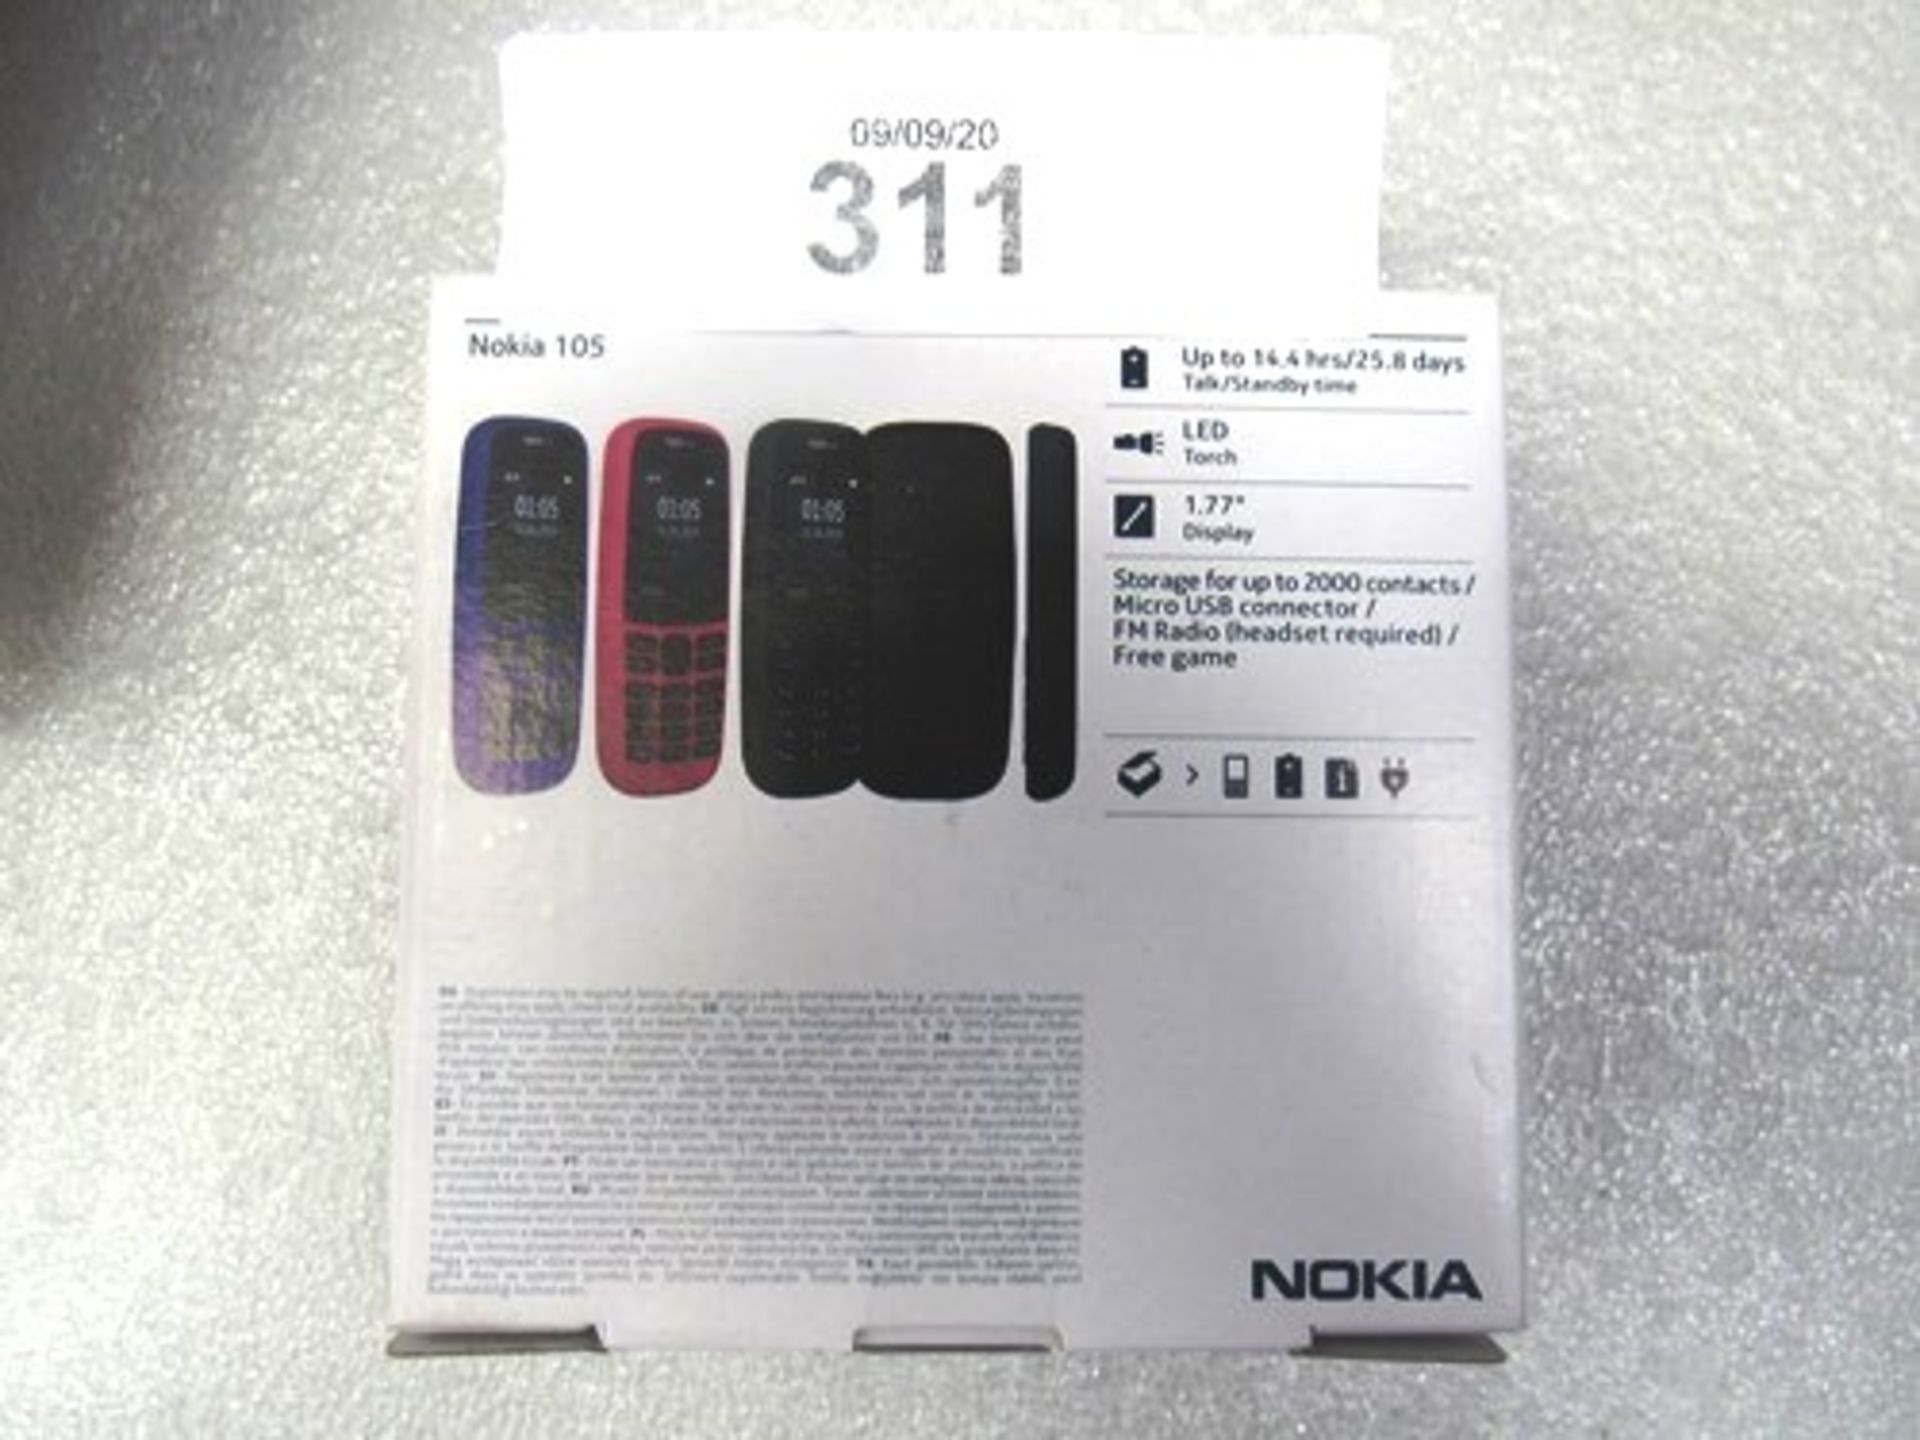 10 x Nokia 105 black phones, model 16KIGBO1A14 TA-1203 S5 - Sealed new in box. These phones have not - Image 3 of 3